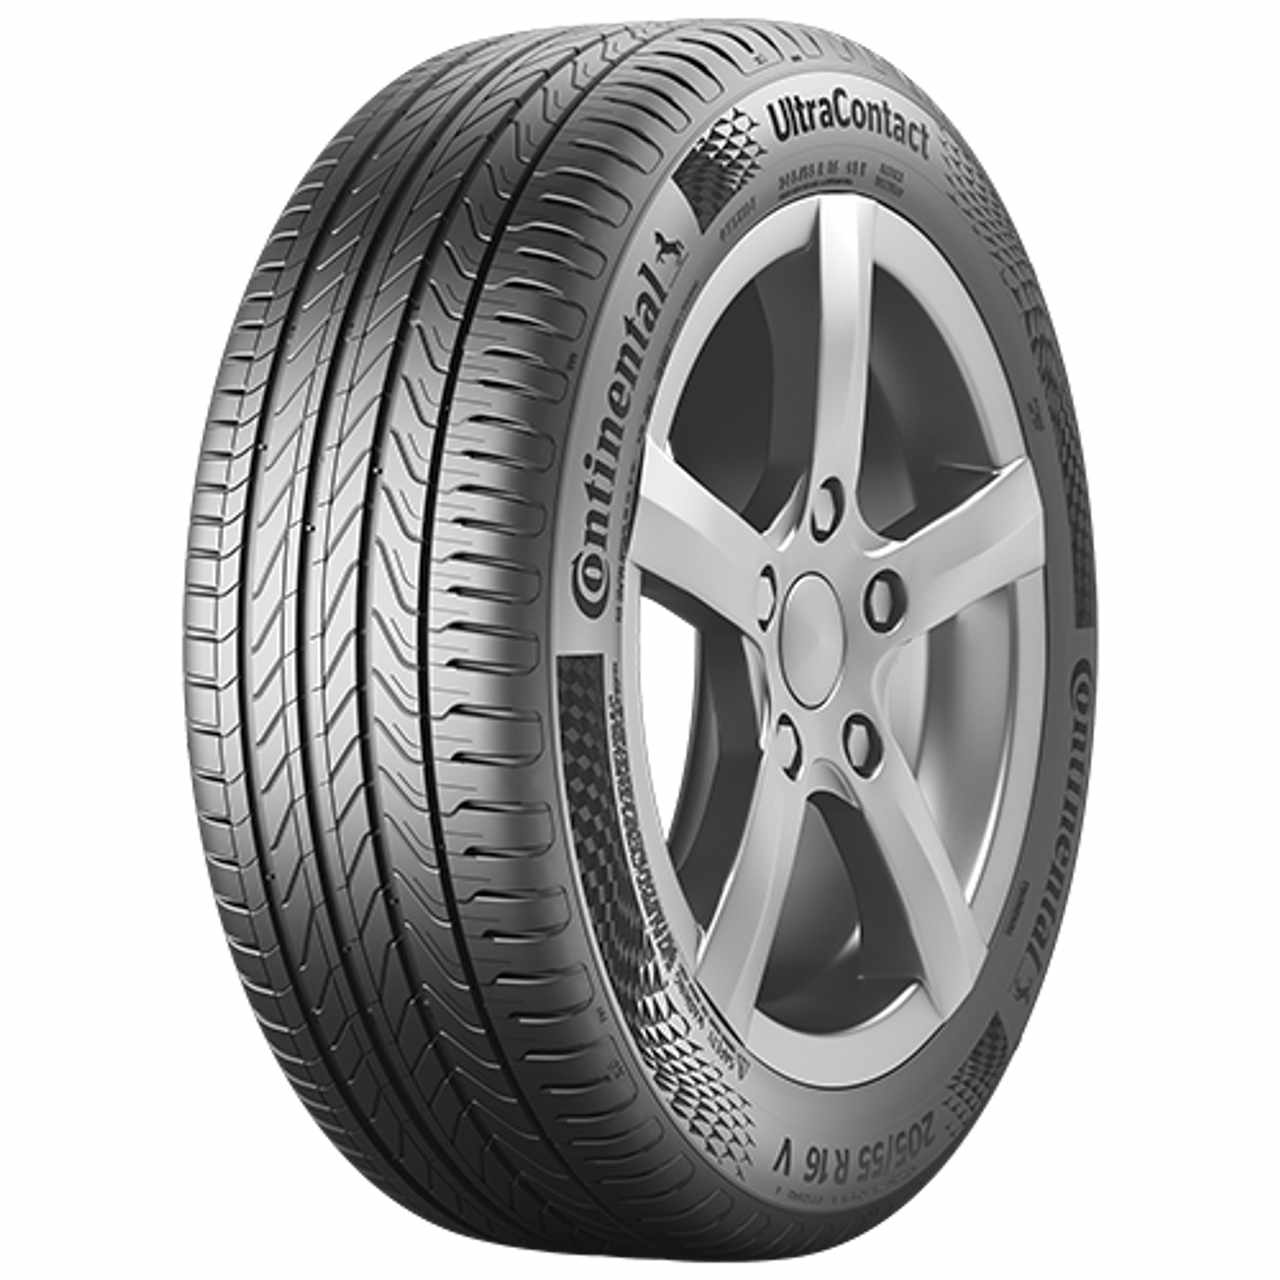 CONTINENTAL ULTRACONTACT (EVc) 185/60R15 88H BSW